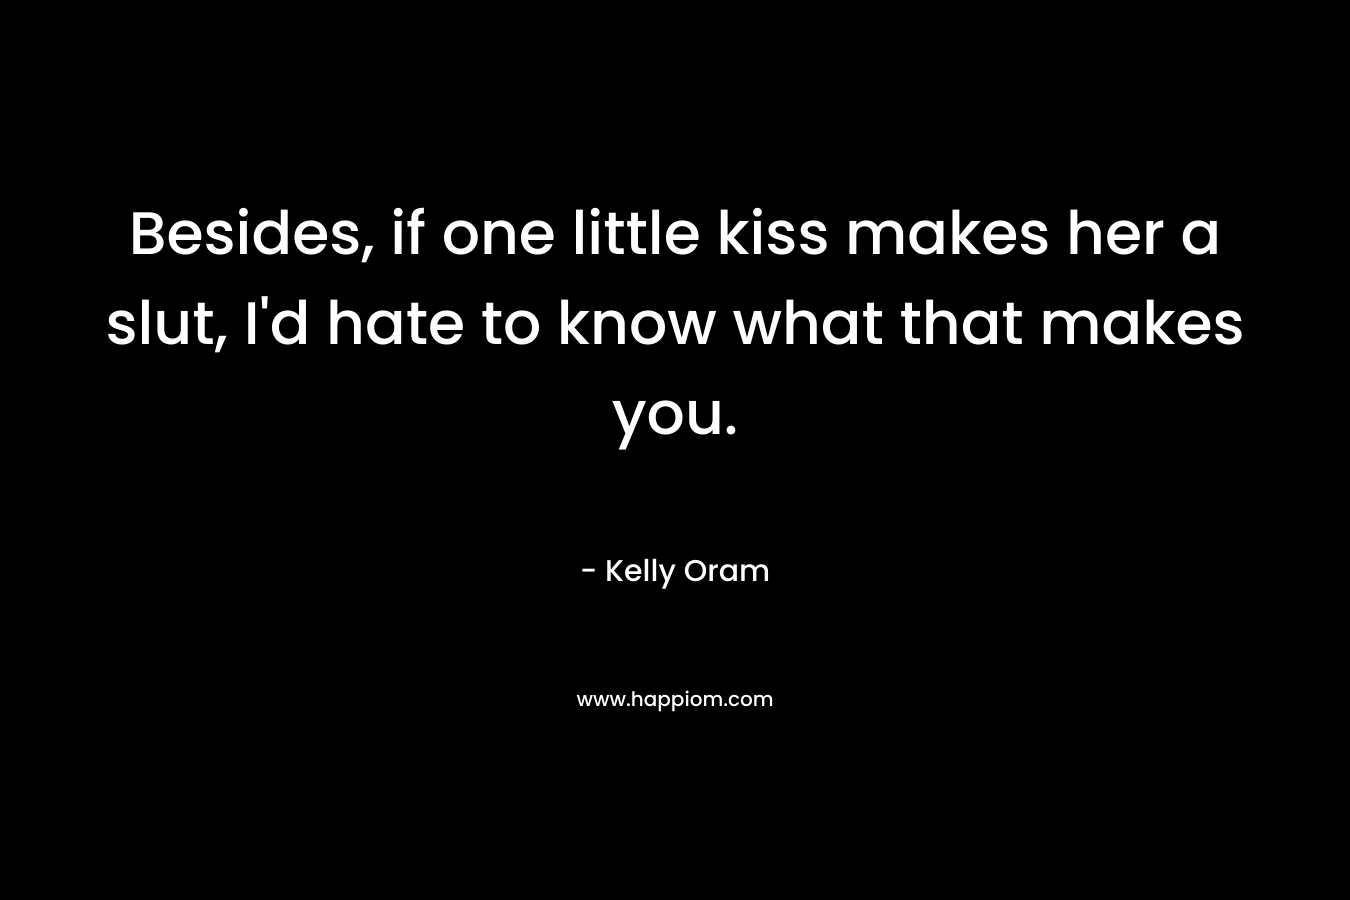 Besides, if one little kiss makes her a slut, I'd hate to know what that makes you.